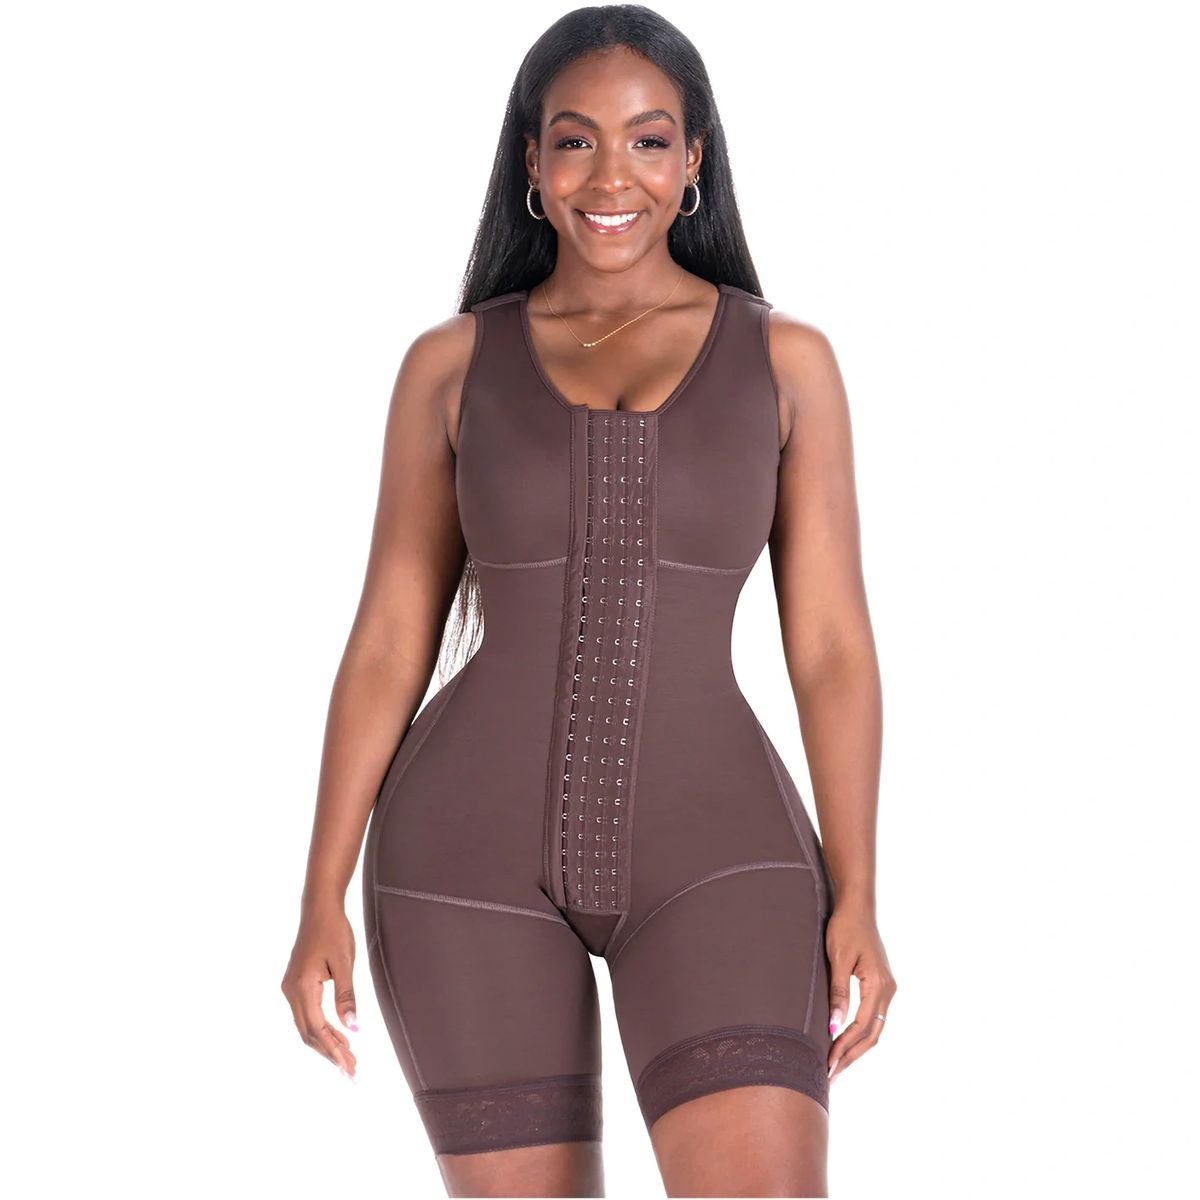 BLING SHAPERS EXTREME 553BF SHAPEWEAR BODYSUIT WITH BUILT-IN BRA (Size: XS,  Color: Chocolate)